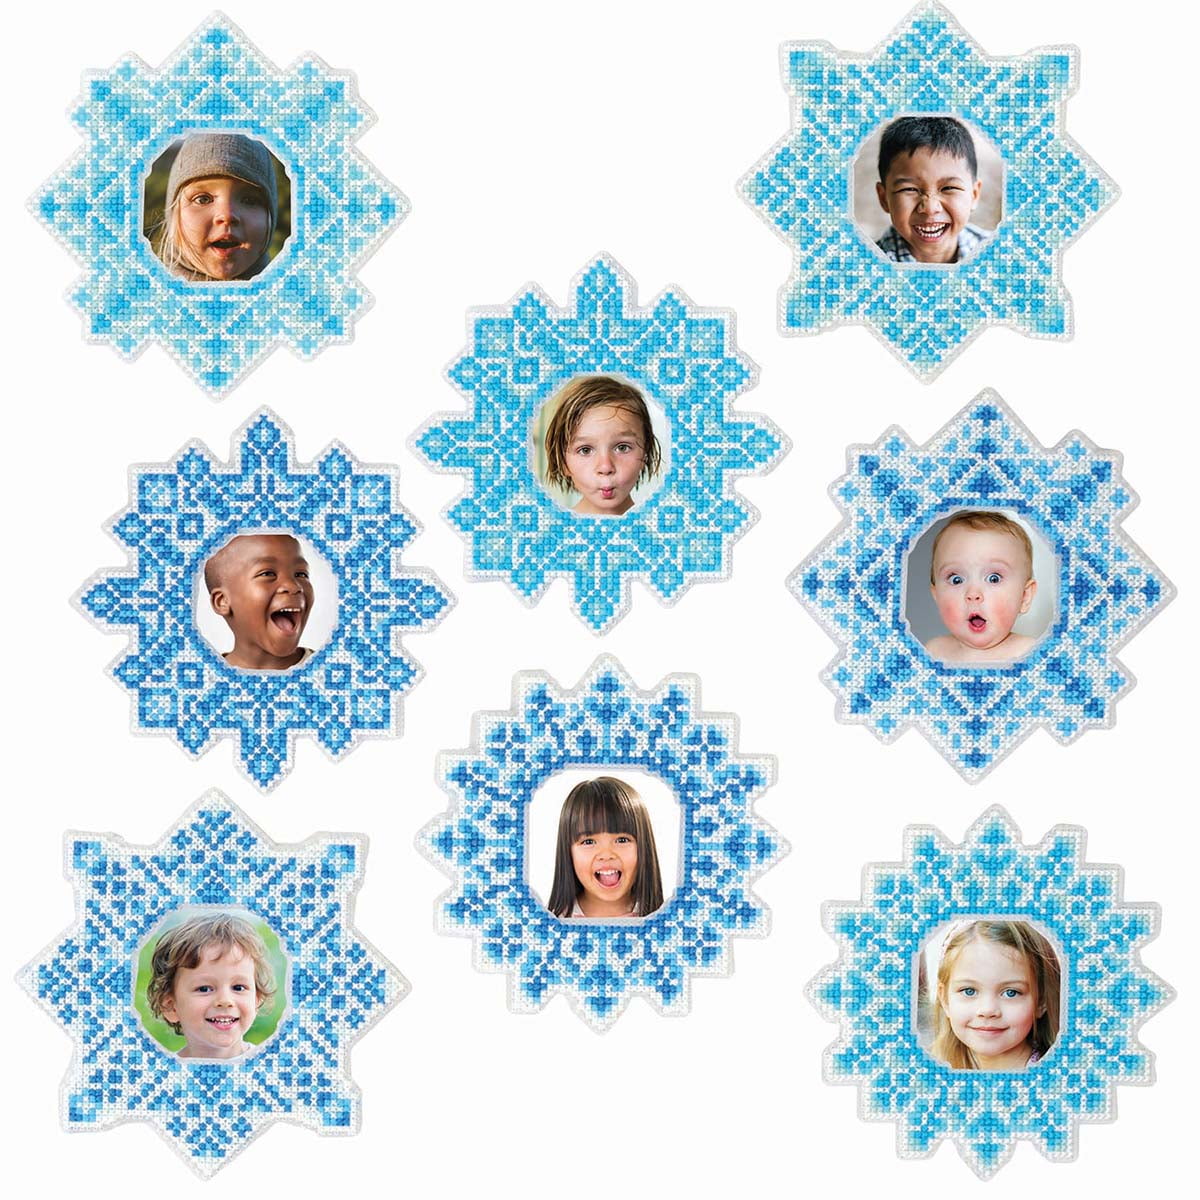 Cross-Stitch Snowflakes framed in double-sided ornament frames